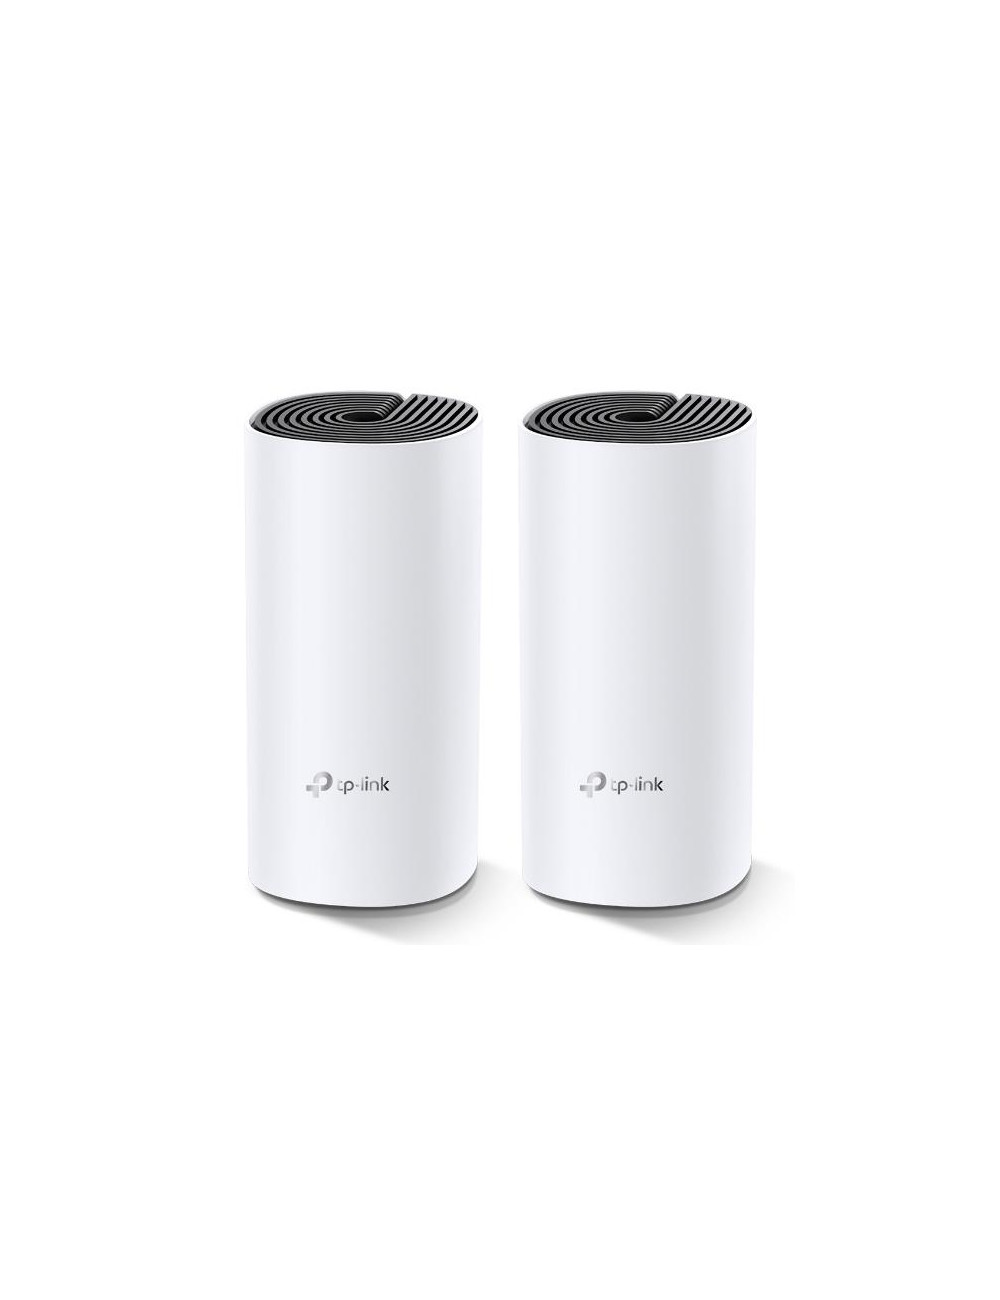 Wireless Router|TP-LINK|Wireless Router|2-pack|1200 Mbps|DECOM4(2-PACK)